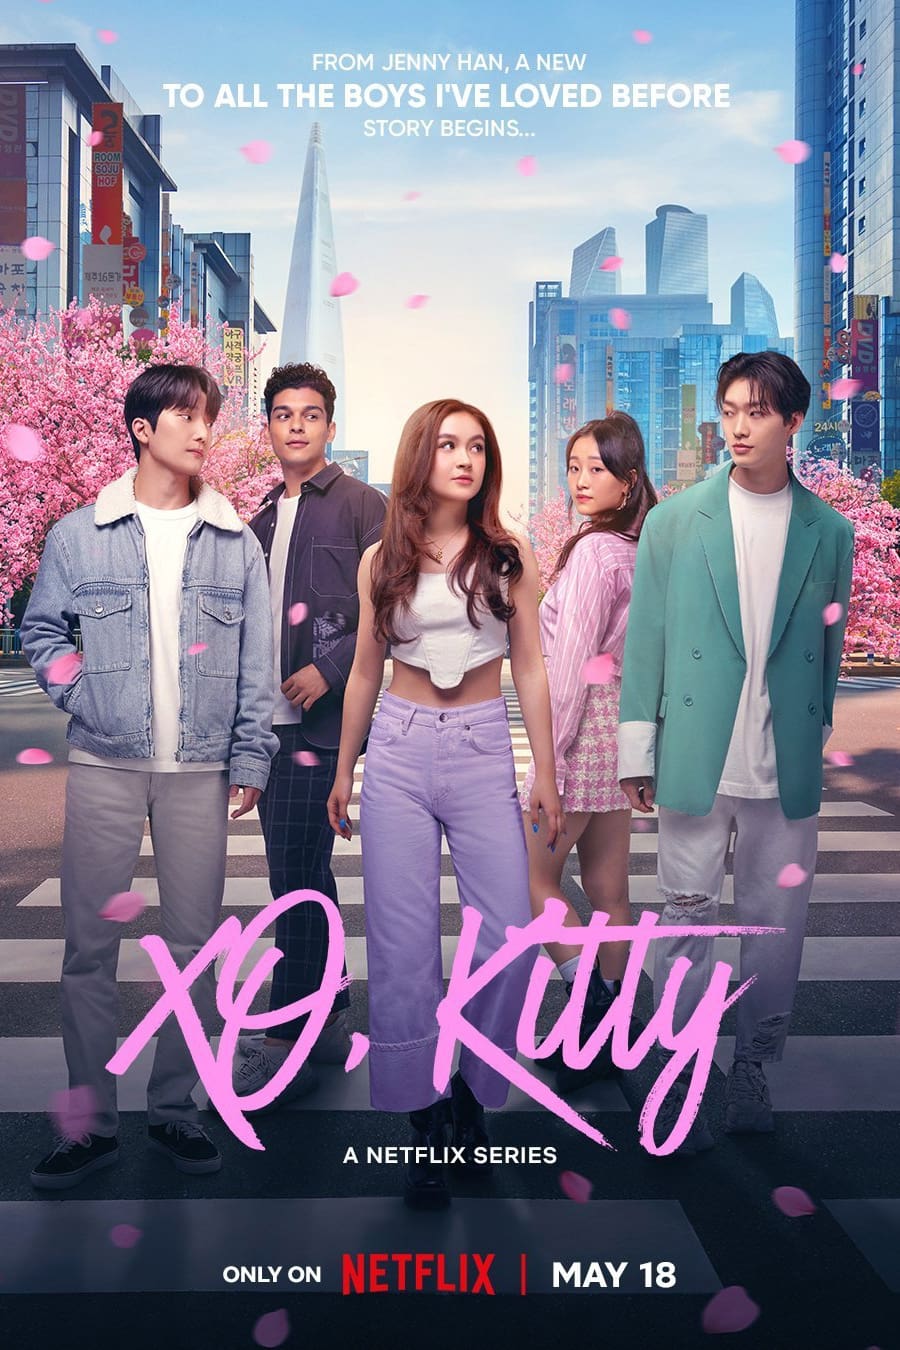 A Netflix poster for "XO, Kitty." Besides the title, it reads, "From Jenny Han, a new 'To All the Boys I've Loved Before' story begins..." and "Only on Netflix | May 18." Five young people stand in front of a city with blooming cherry blossom trees. From left to right, there is a young man with light skin and dark hair in a jean jacket, a young man with light brown skin and dark curls wearing a dark gray shirt, a young woman with light skin and brown hair in a white tanktop, a young woman with light skin and black hair wearing pink, a young man with light skin and black hair wearing a mint jacket.